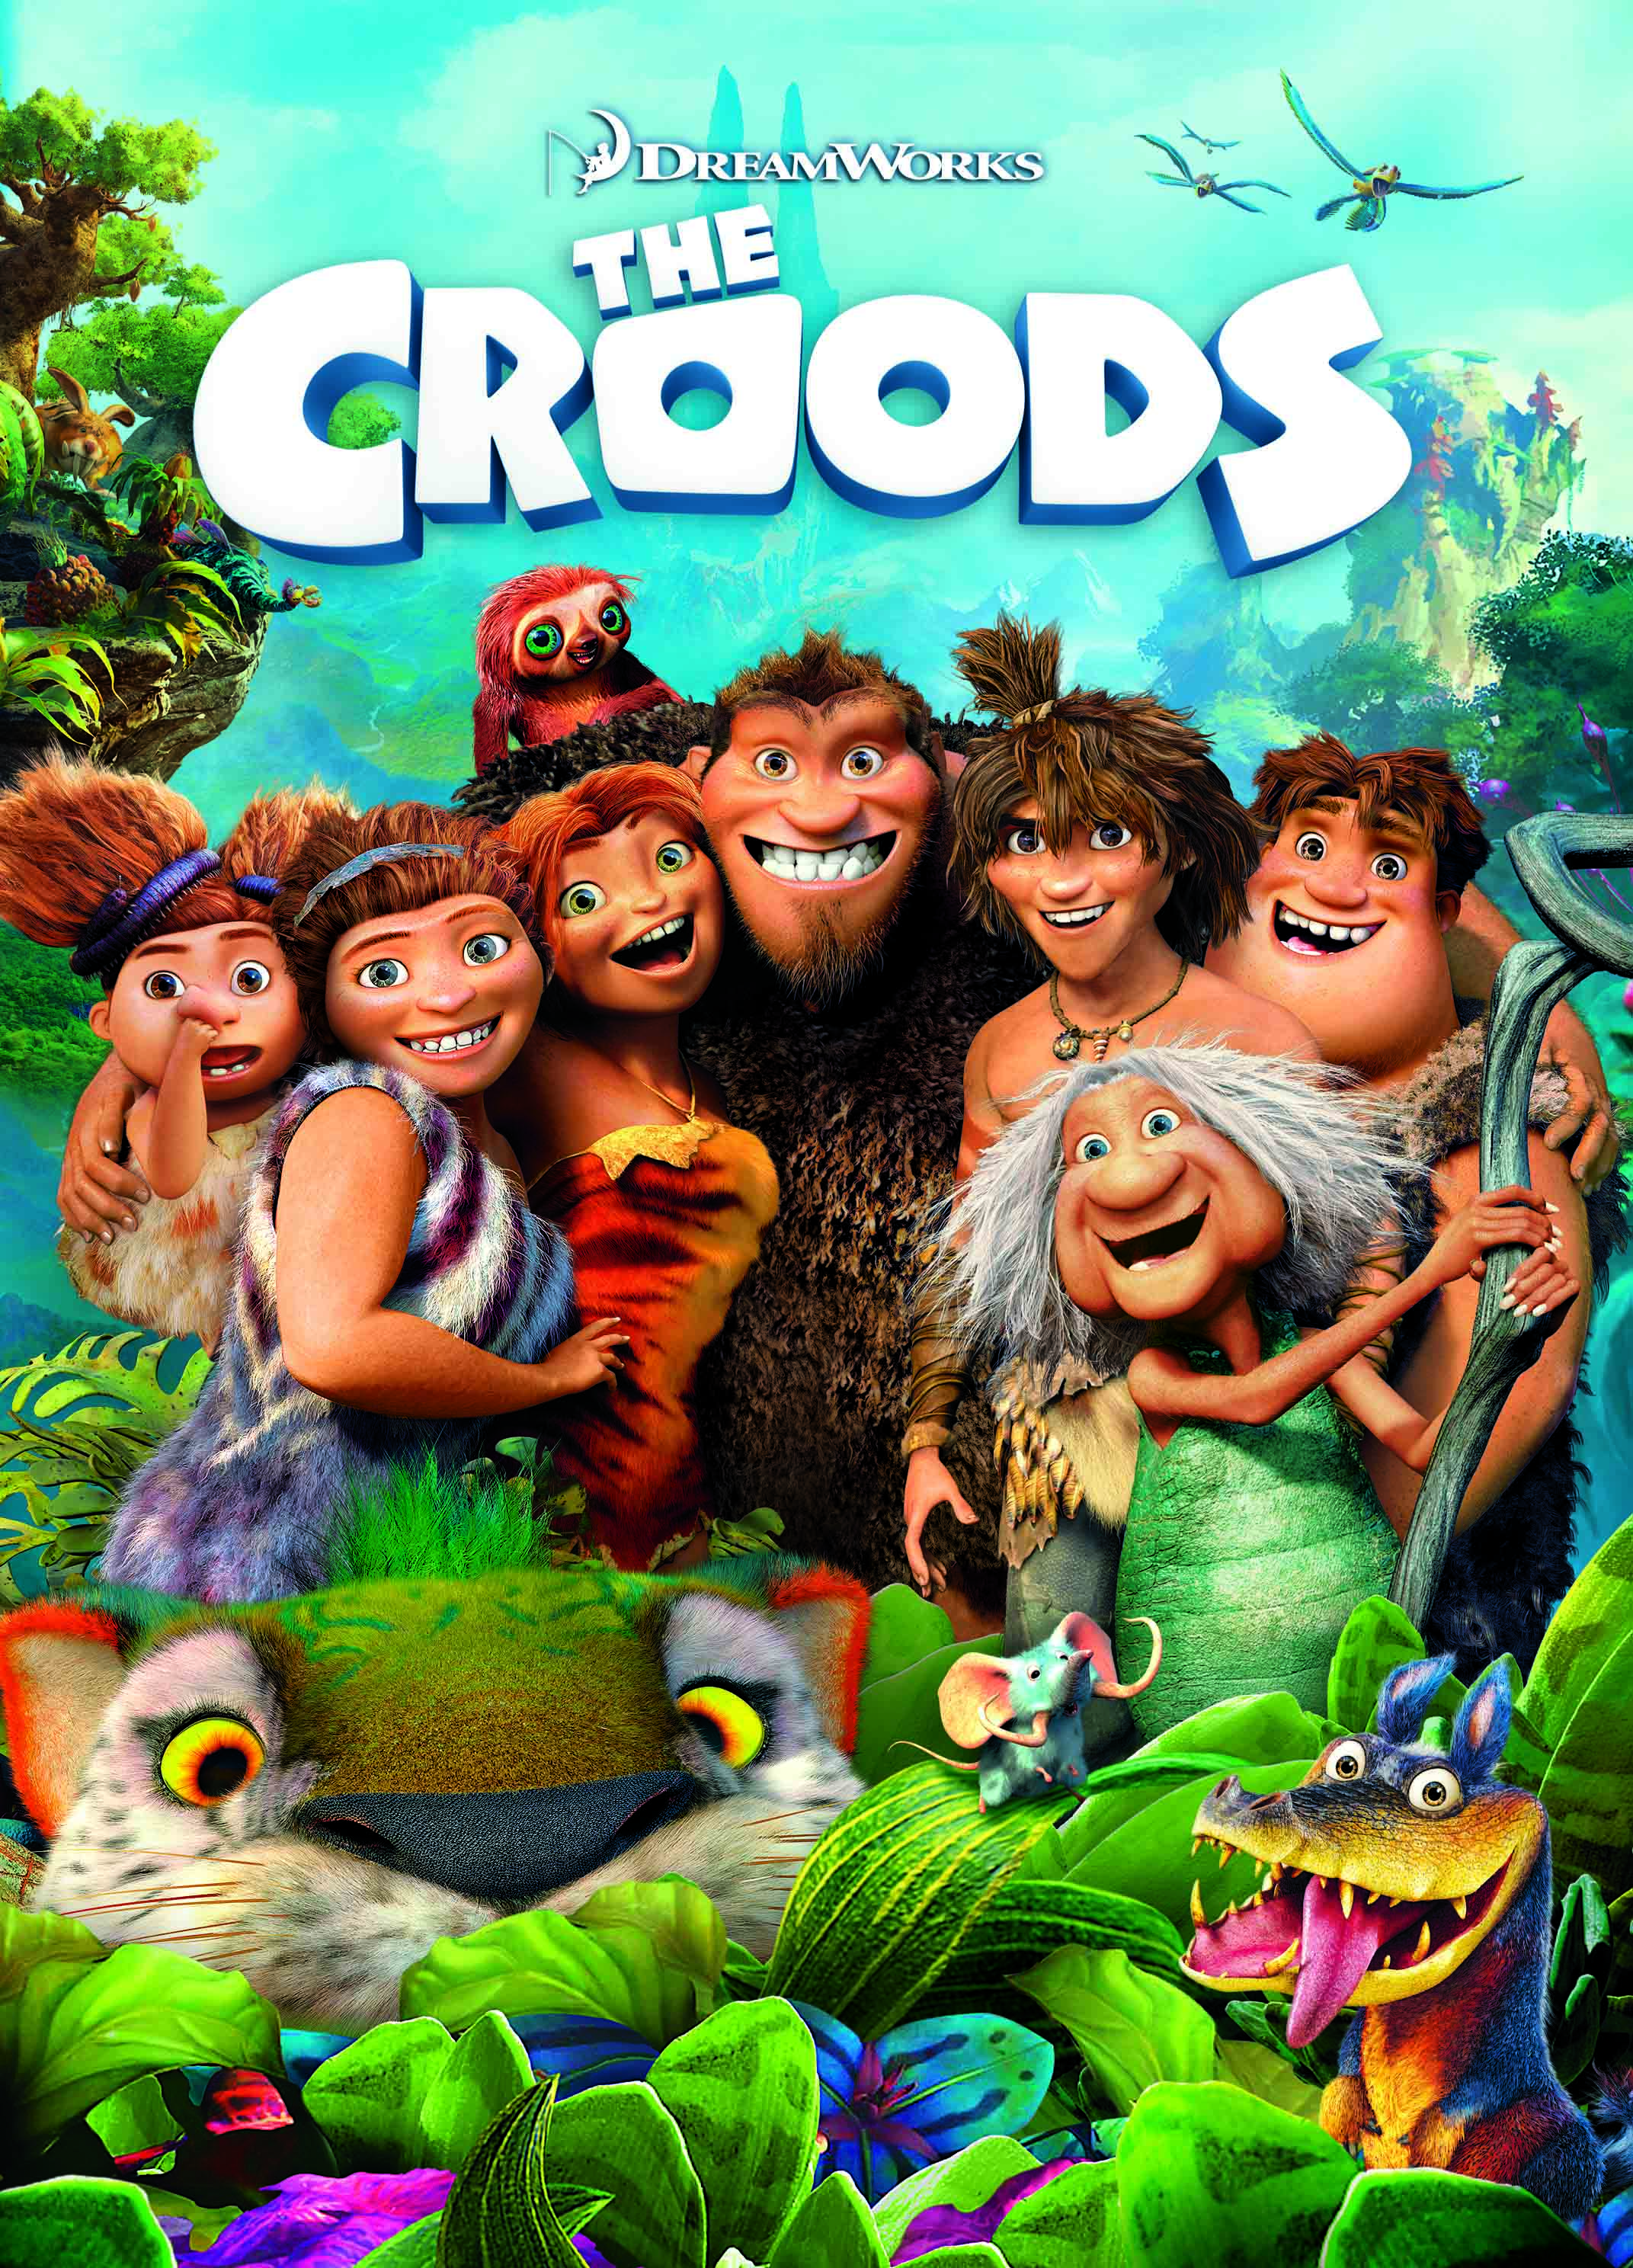 High Resolution Wallpaper | The Croods 2143x2976 px